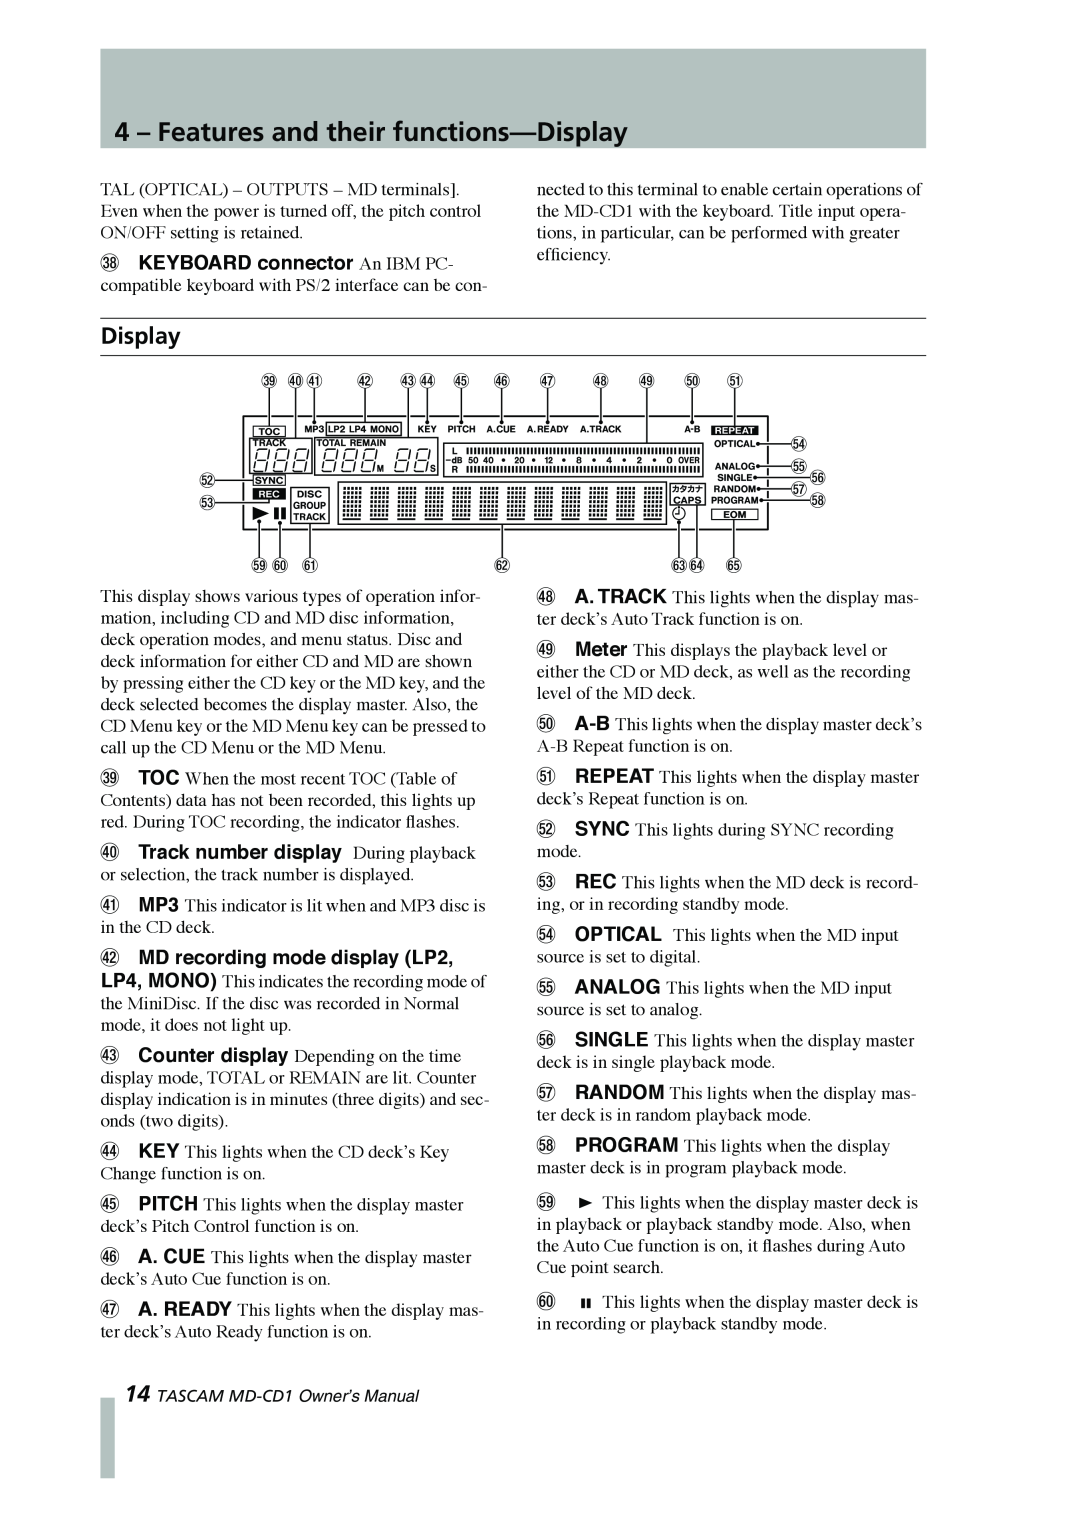 Tascam MD-CD1 owner manual Features and their functions-Display 